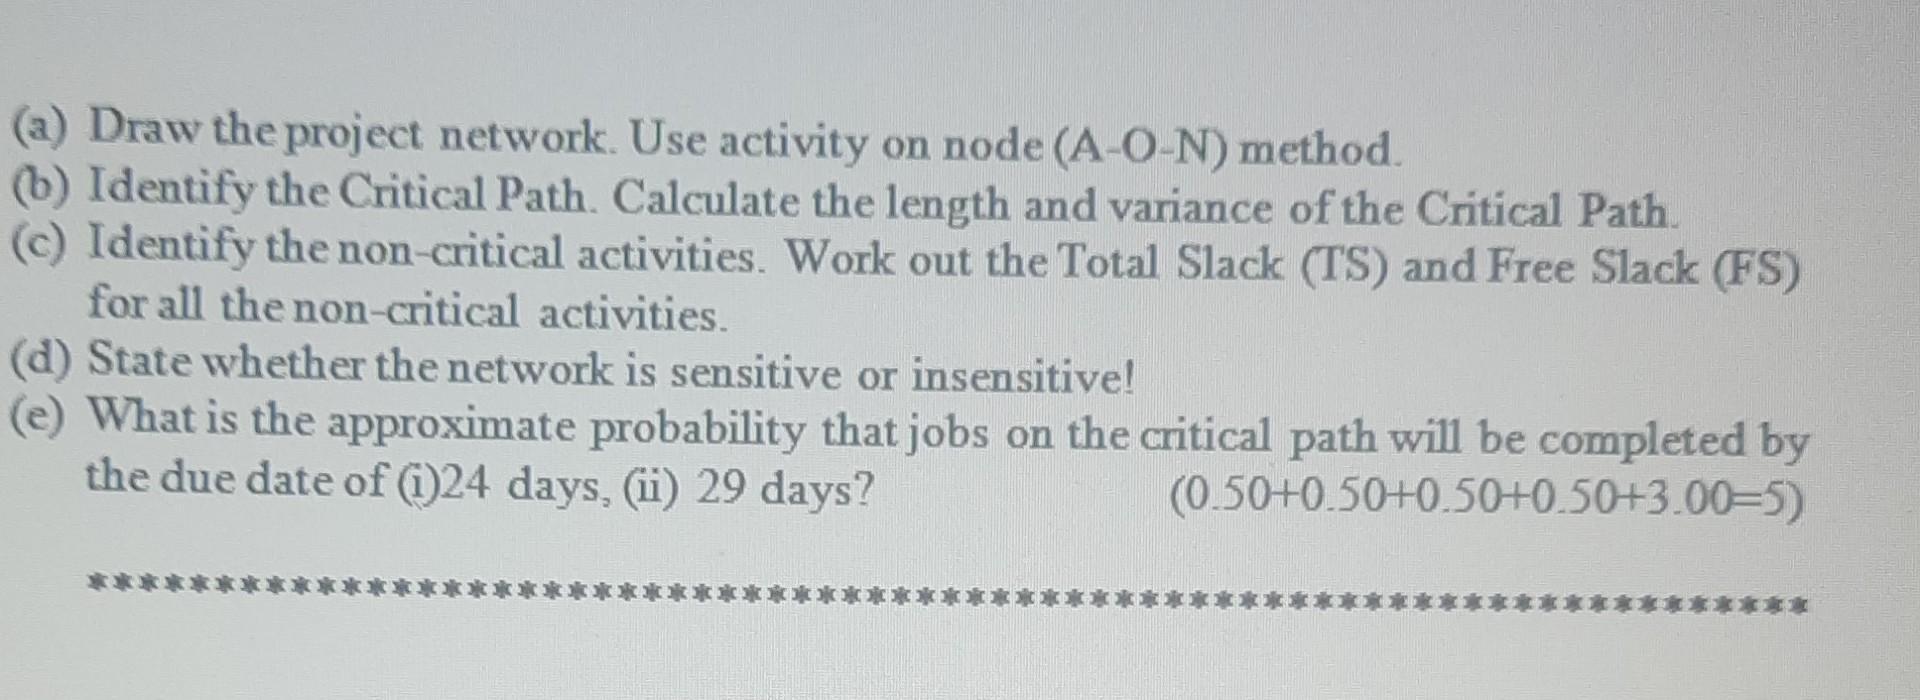 (a) Draw the project network. Use activity on node (A-O-N) method. (b) Identify the Critical Path. Calculate